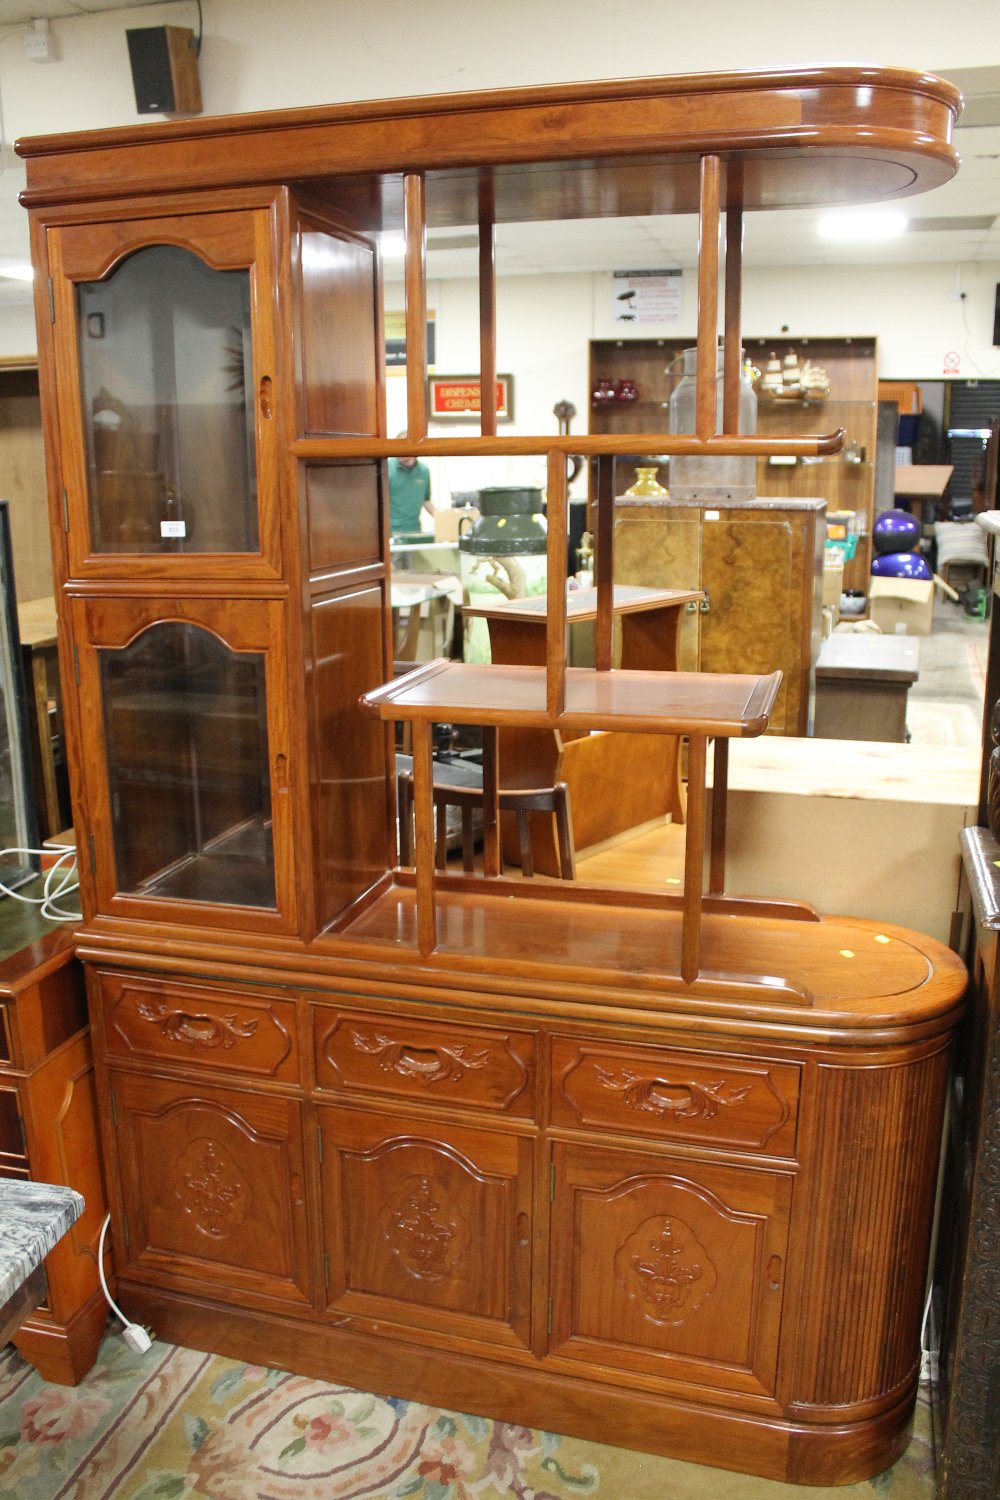 A LARGE MODERN ORIENTAL STYLE GLAZED ROOM DIVIDER IN TWO SECTIONS, DECORATED WITH CARVED FLORAL